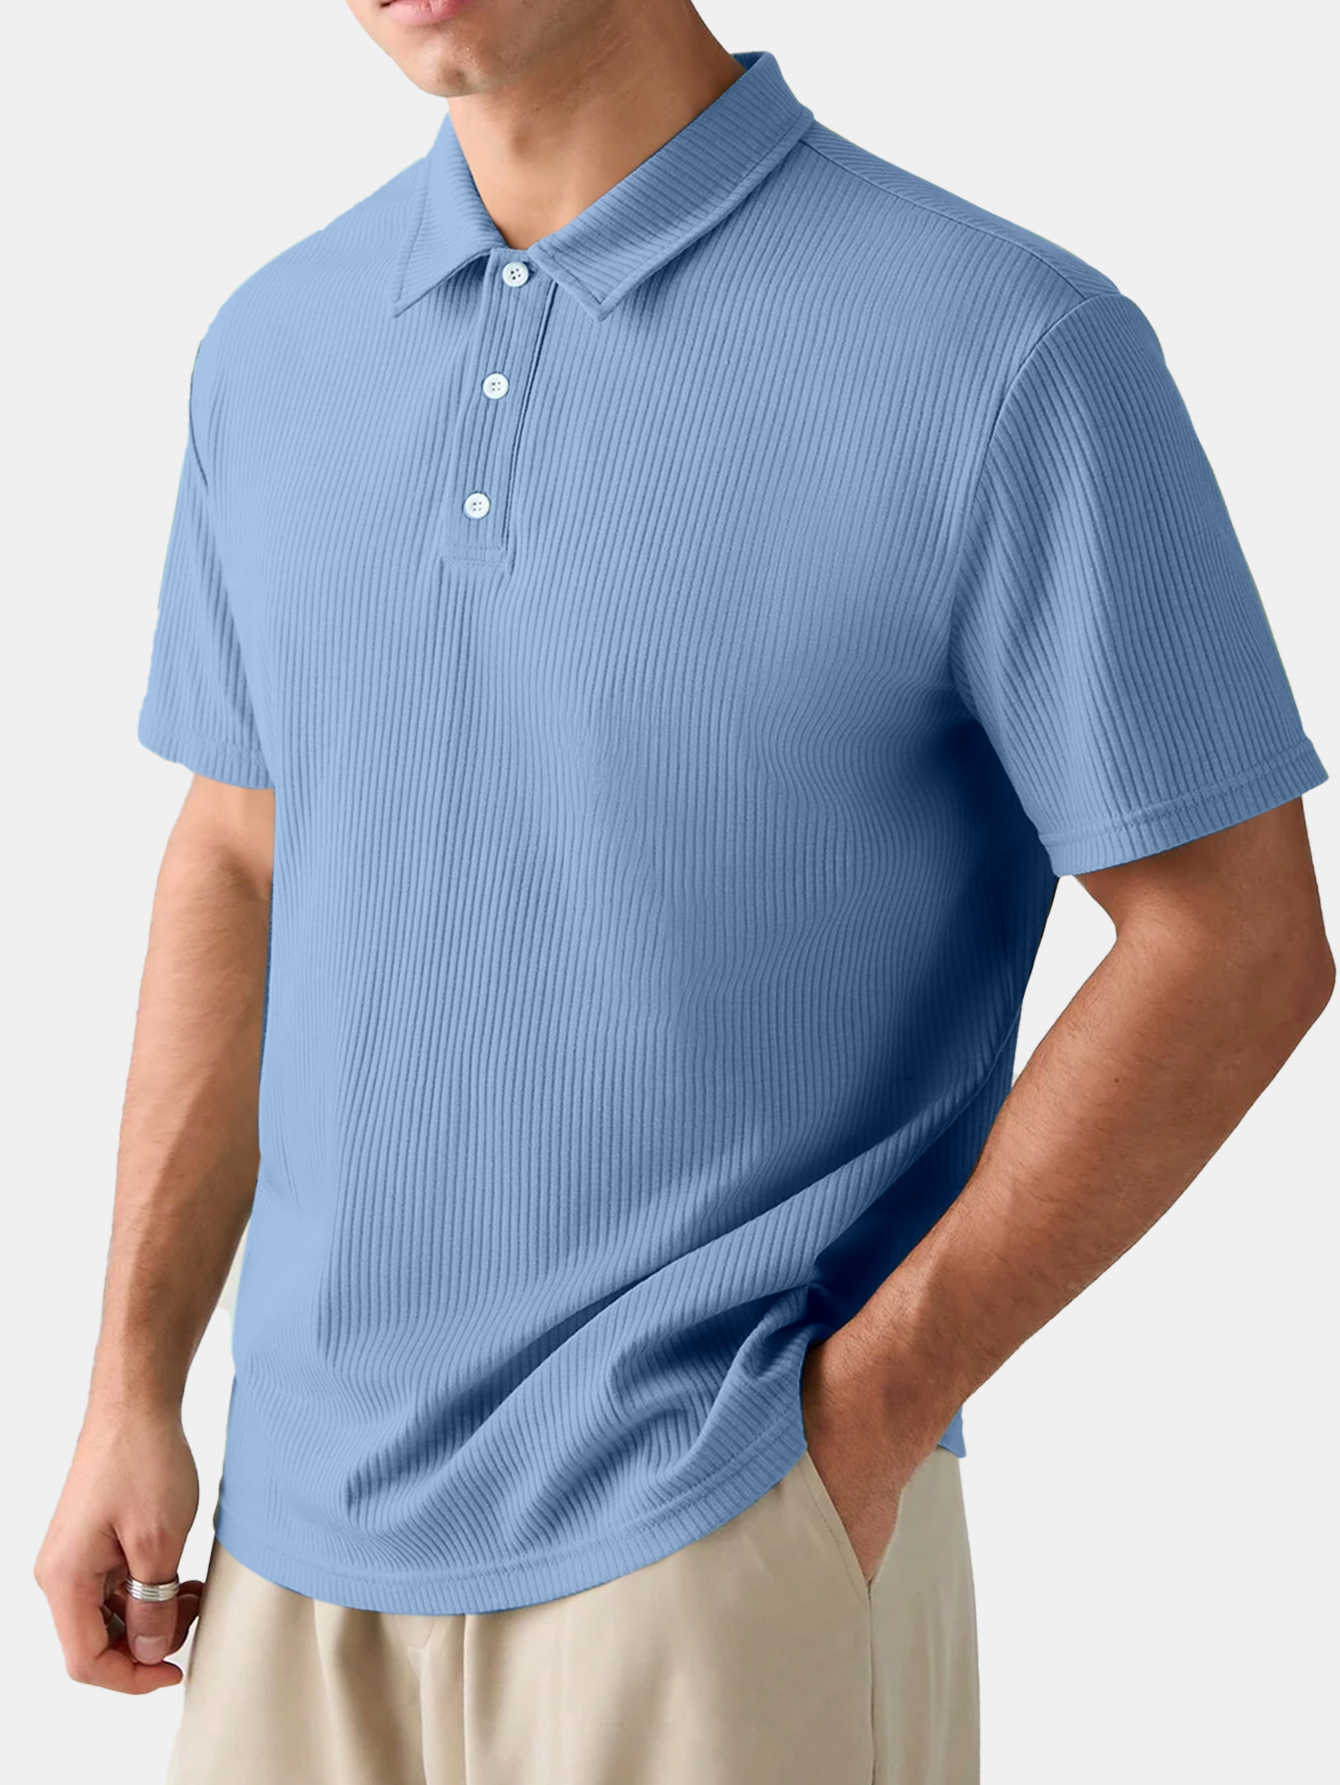 Men's Solid Color Comfortable Pit Short-sleeved Polo Shirt